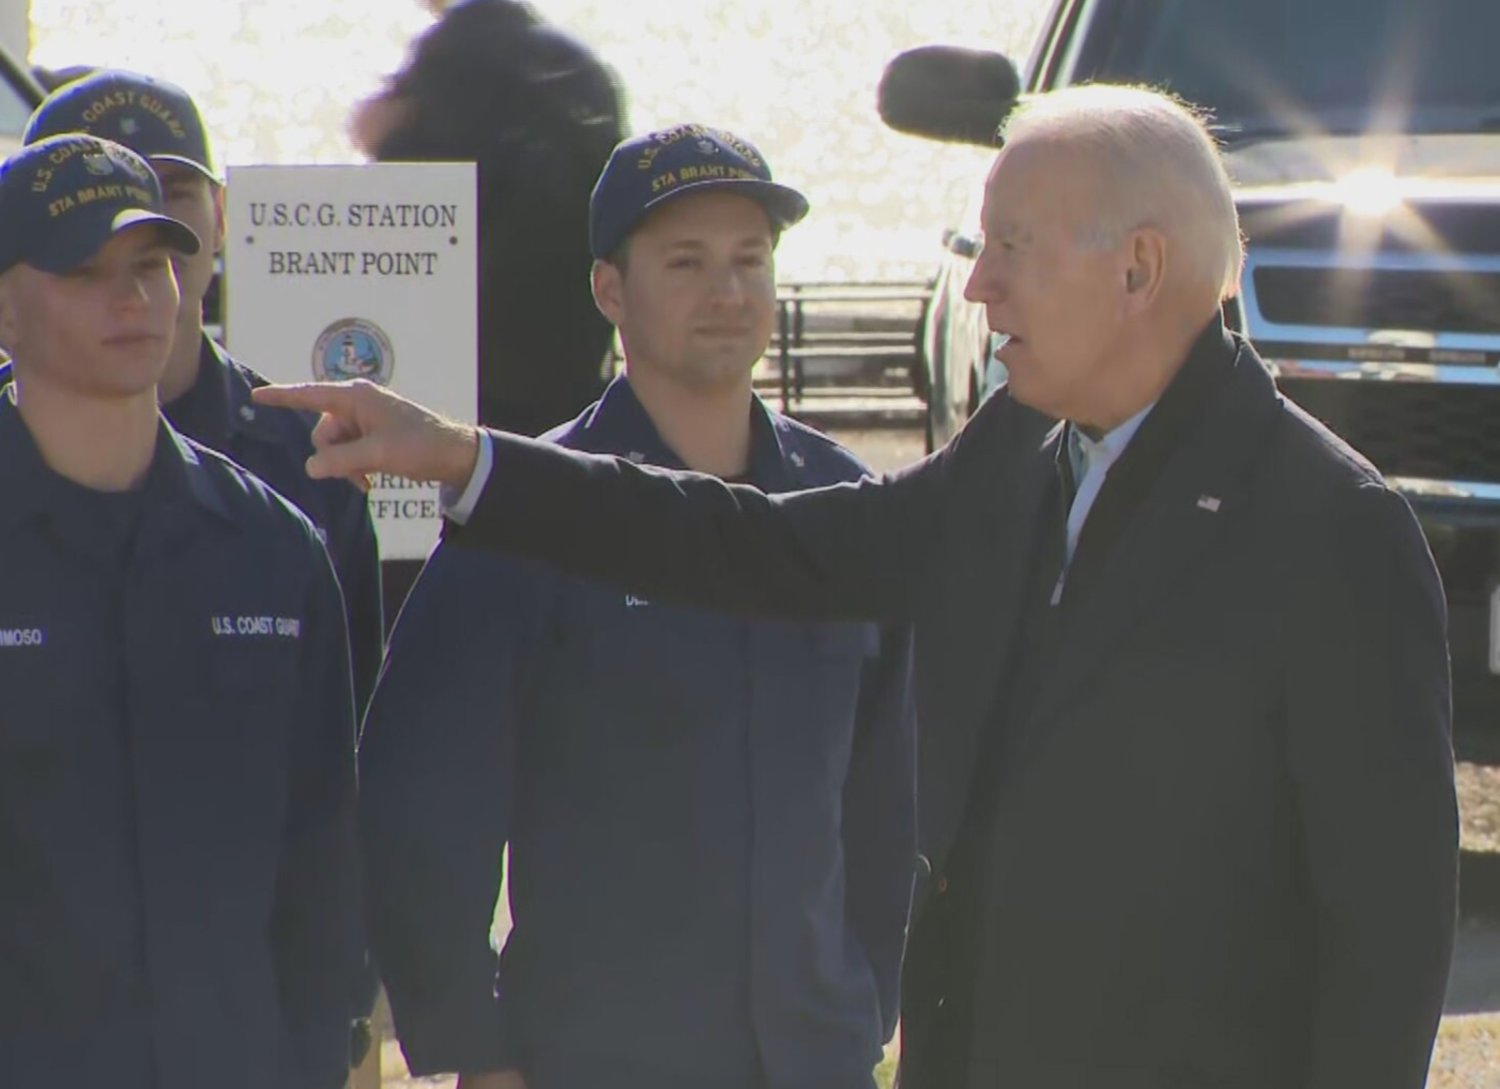 President Biden greets members of Coast Guard Station Brant Point Thurday.